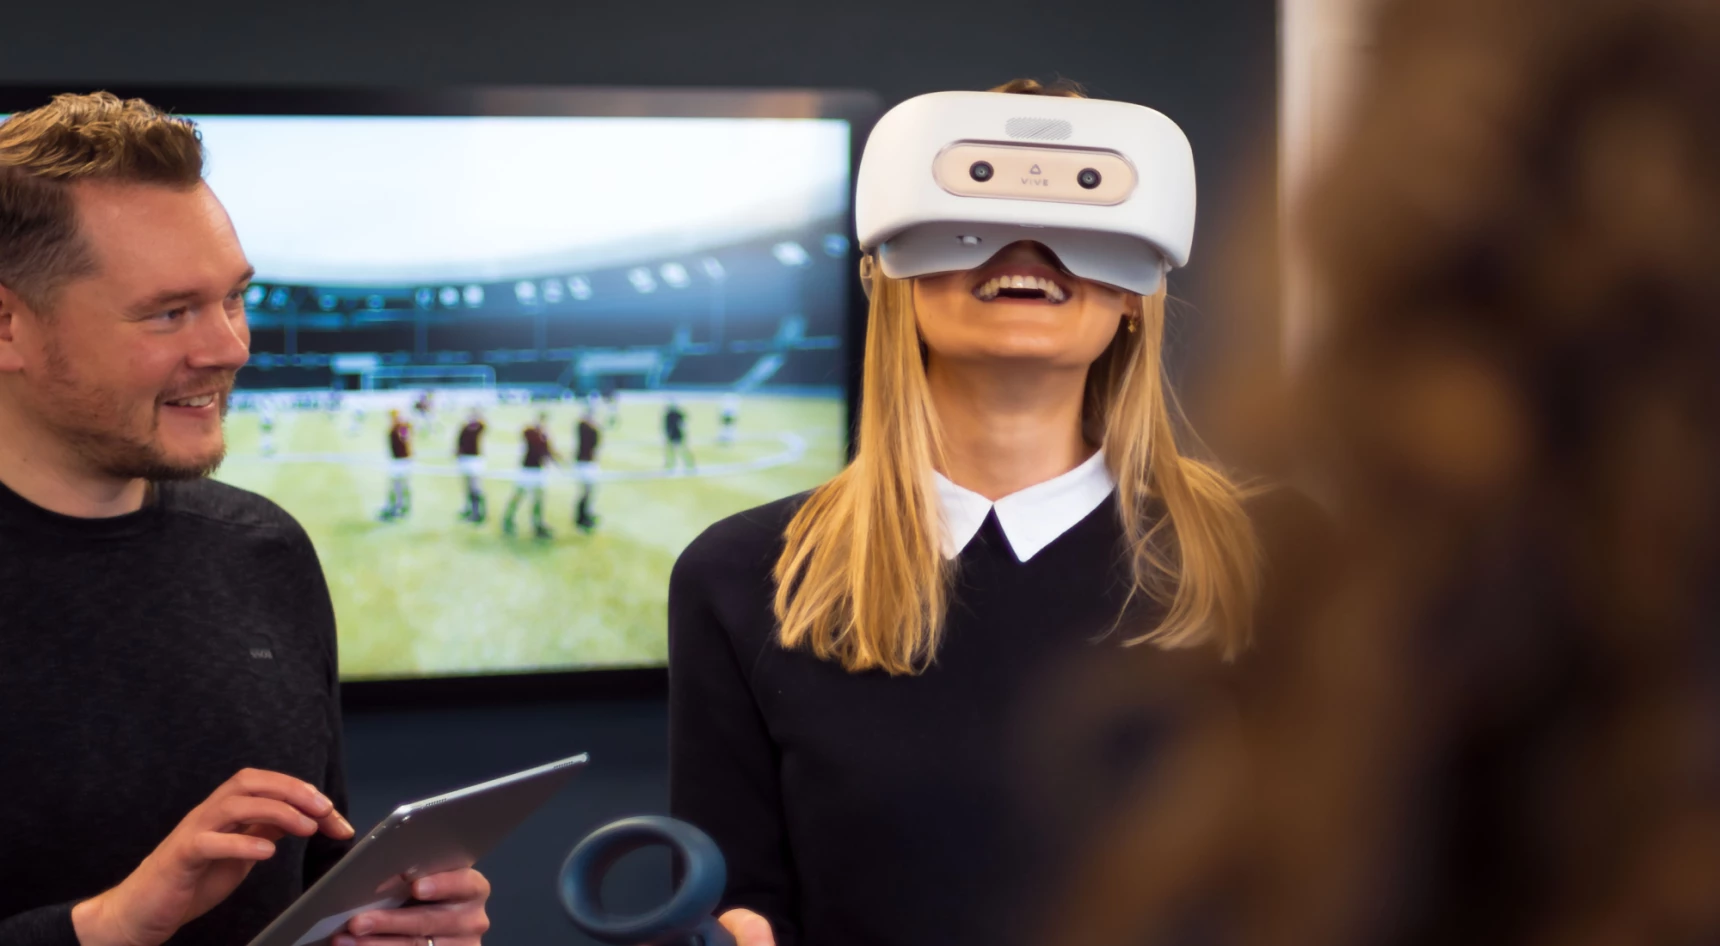 a smiling woman in a VR headset being supervised by a man holding a tablet